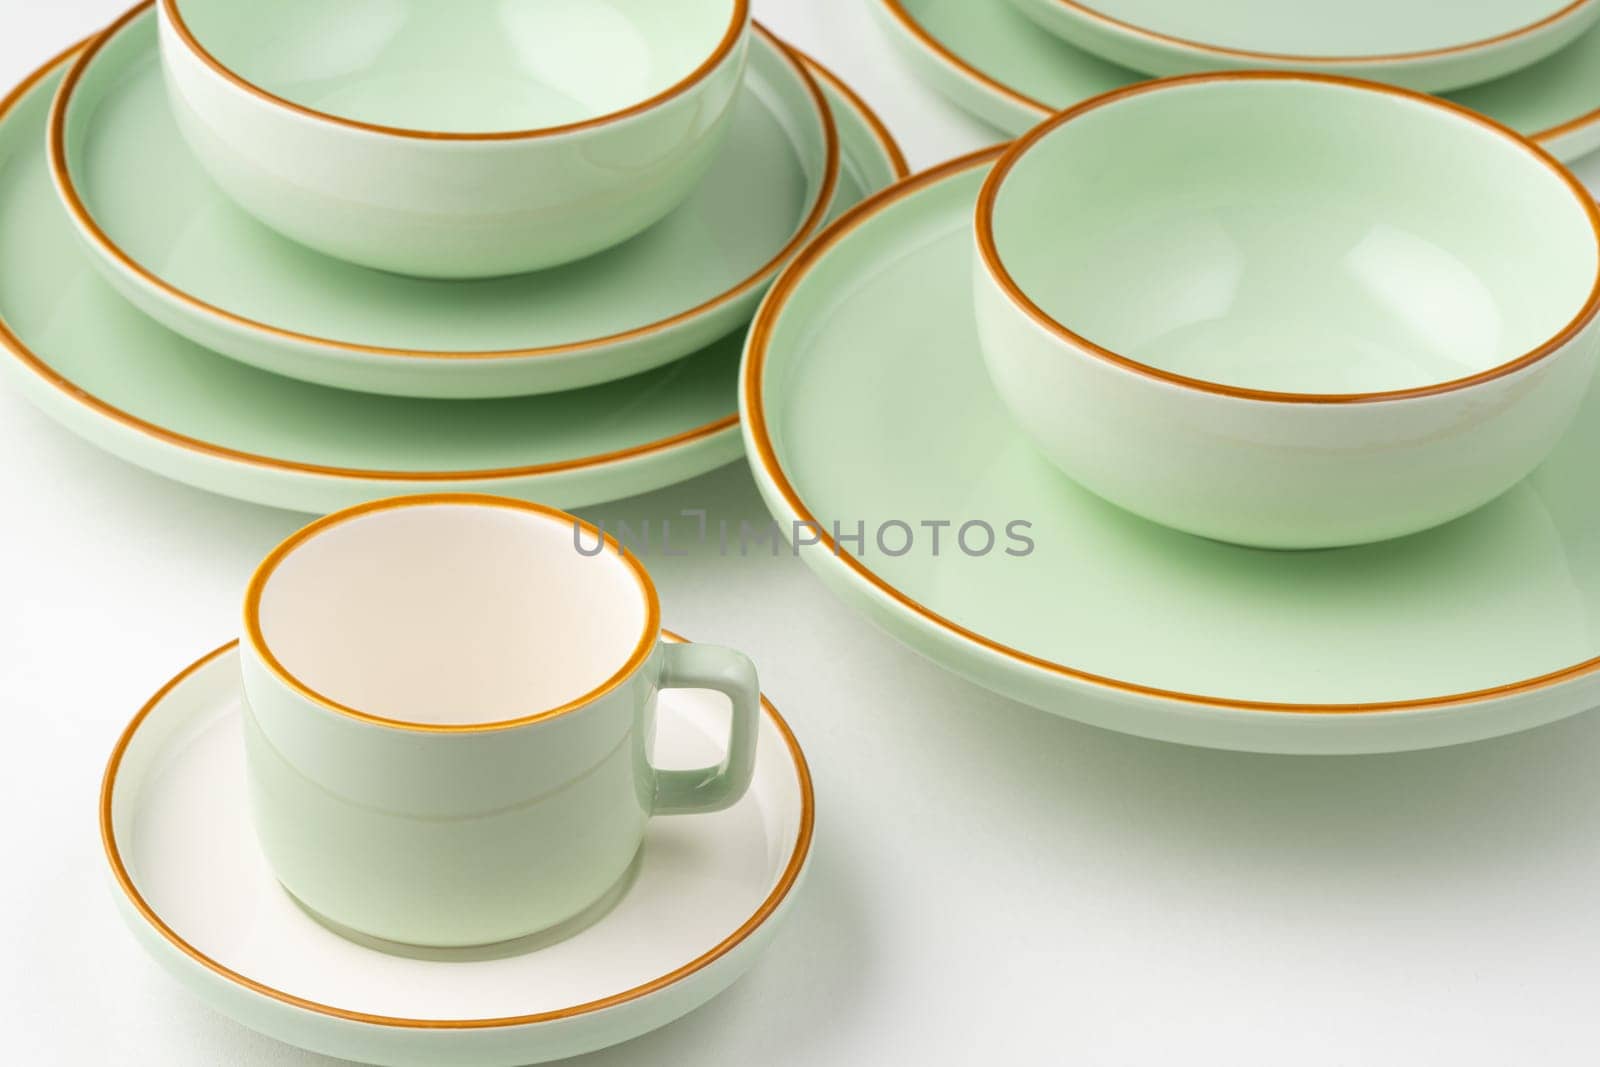 A set of white and pastel green ceramic tableware with orange outlines by A_Karim